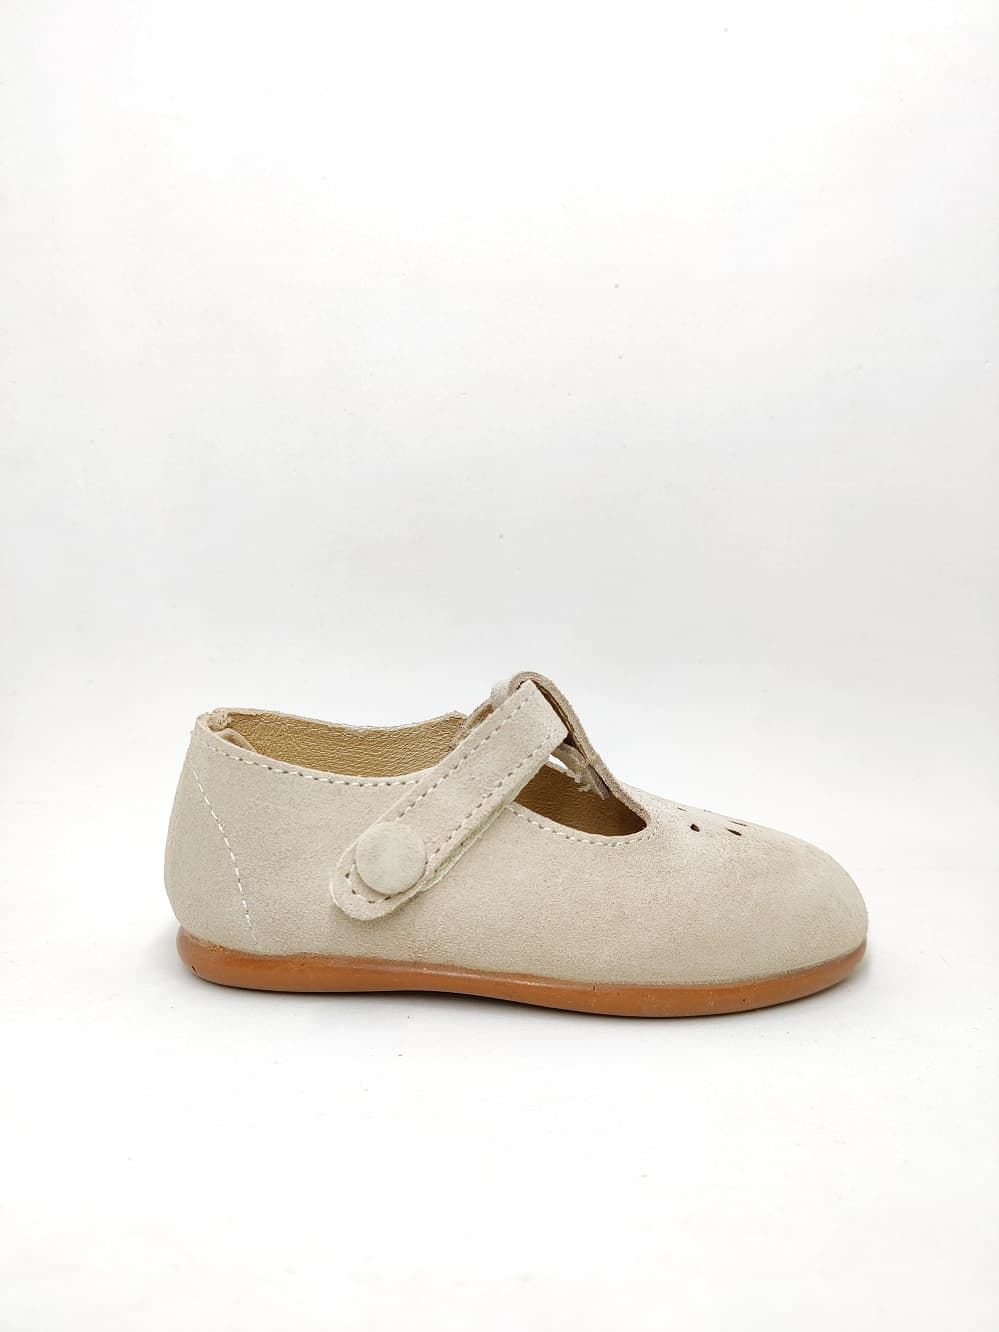 Unisex children's Pepito sweets in raw suede - Image 2